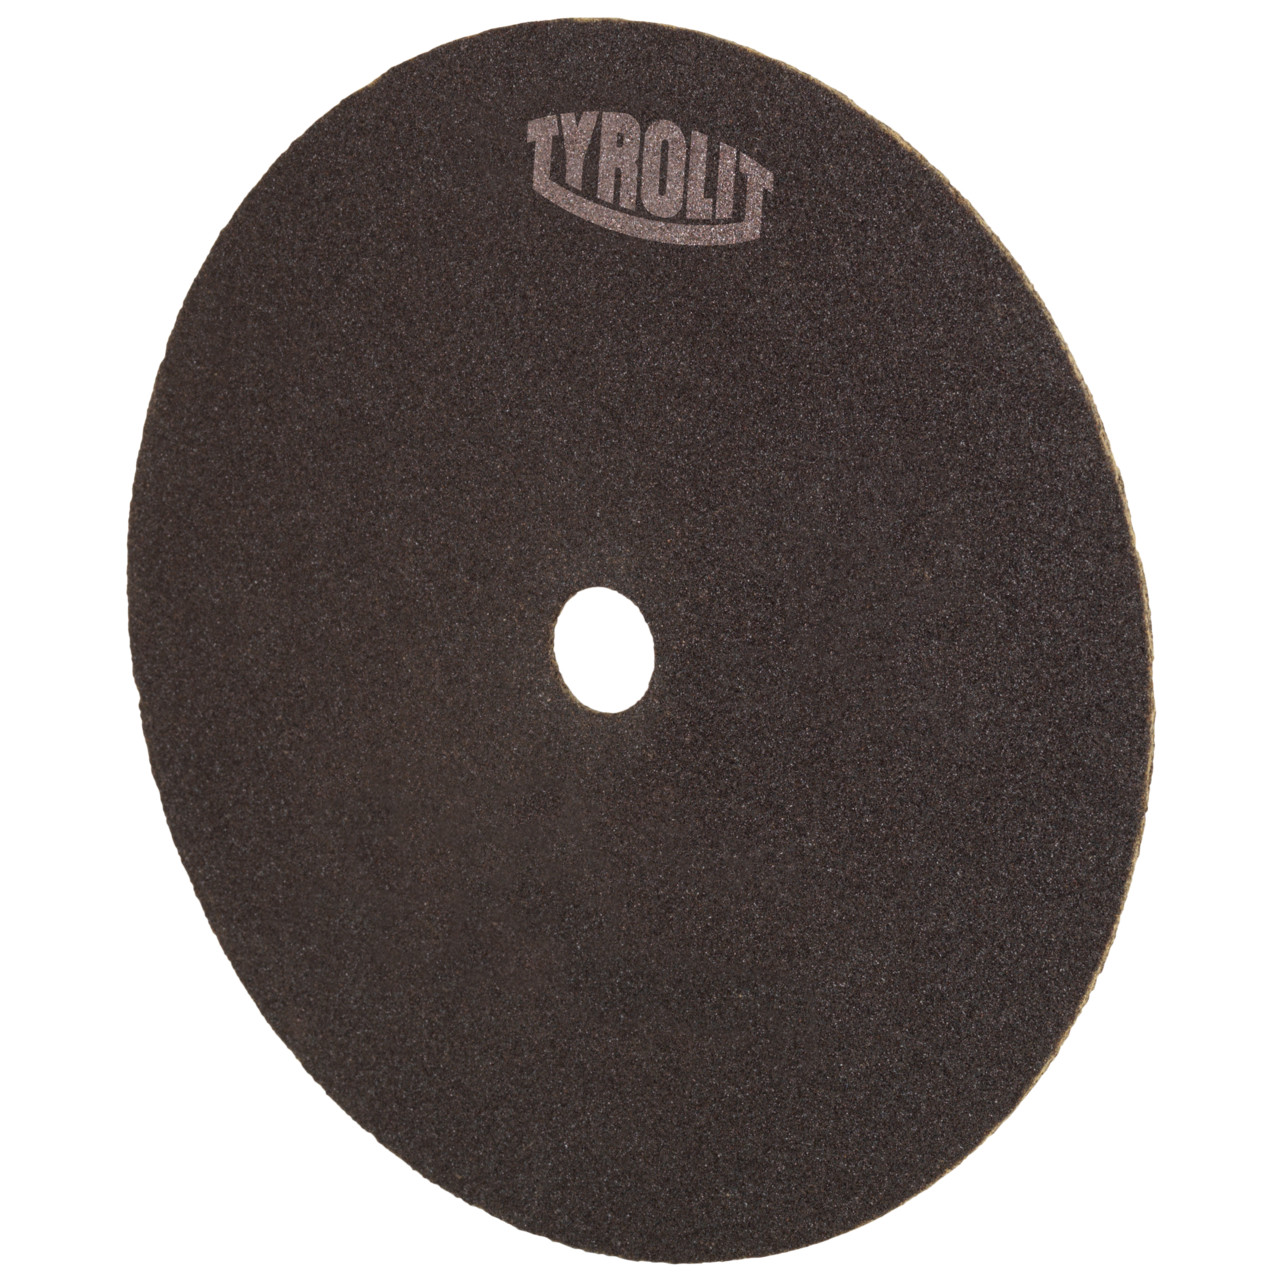 Tyrolit Cutting disc for cutting and saw sharpening DxDxH 200x2x20 For steel and HSS, shape: 41N - straight version (non-woven cutting disc), Art. 6710